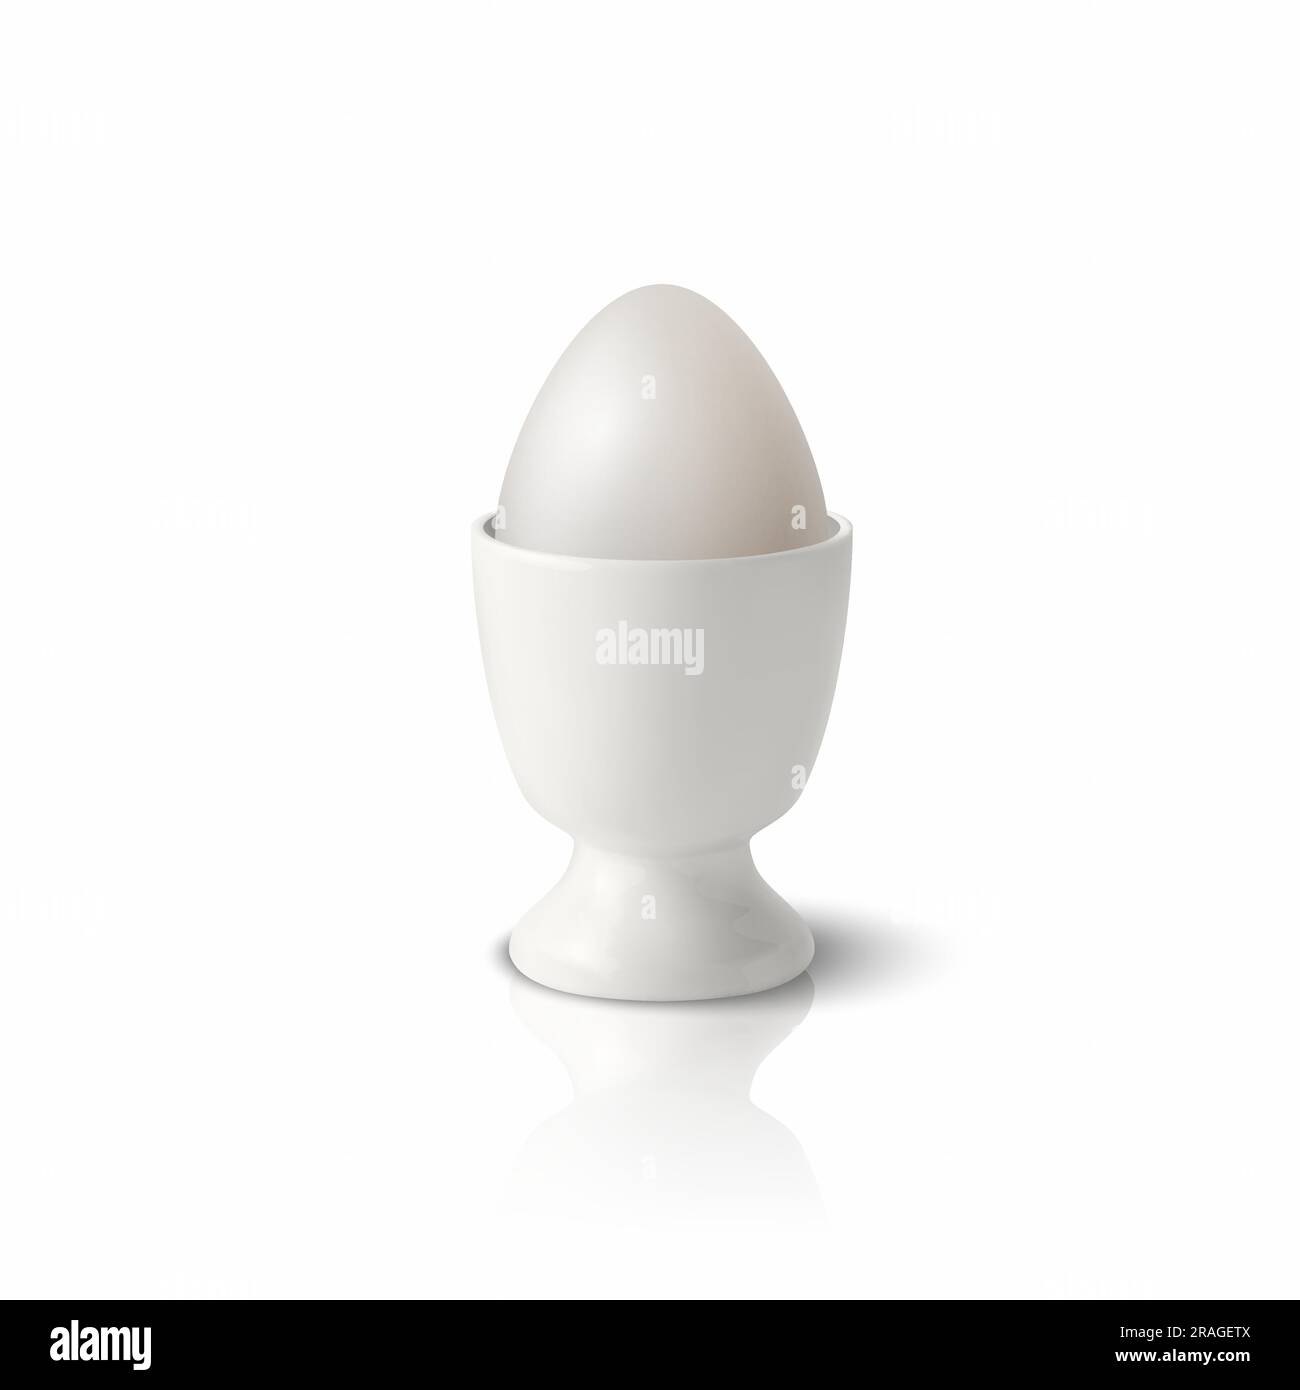 https://c8.alamy.com/comp/2RAGETX/vector-3d-realistic-white-chicken-egg-in-a-white-ceramic-porcelain-boiled-egg-cup-holder-stand-for-breakfast-chicken-egg-icon-isolated-front-view-2RAGETX.jpg